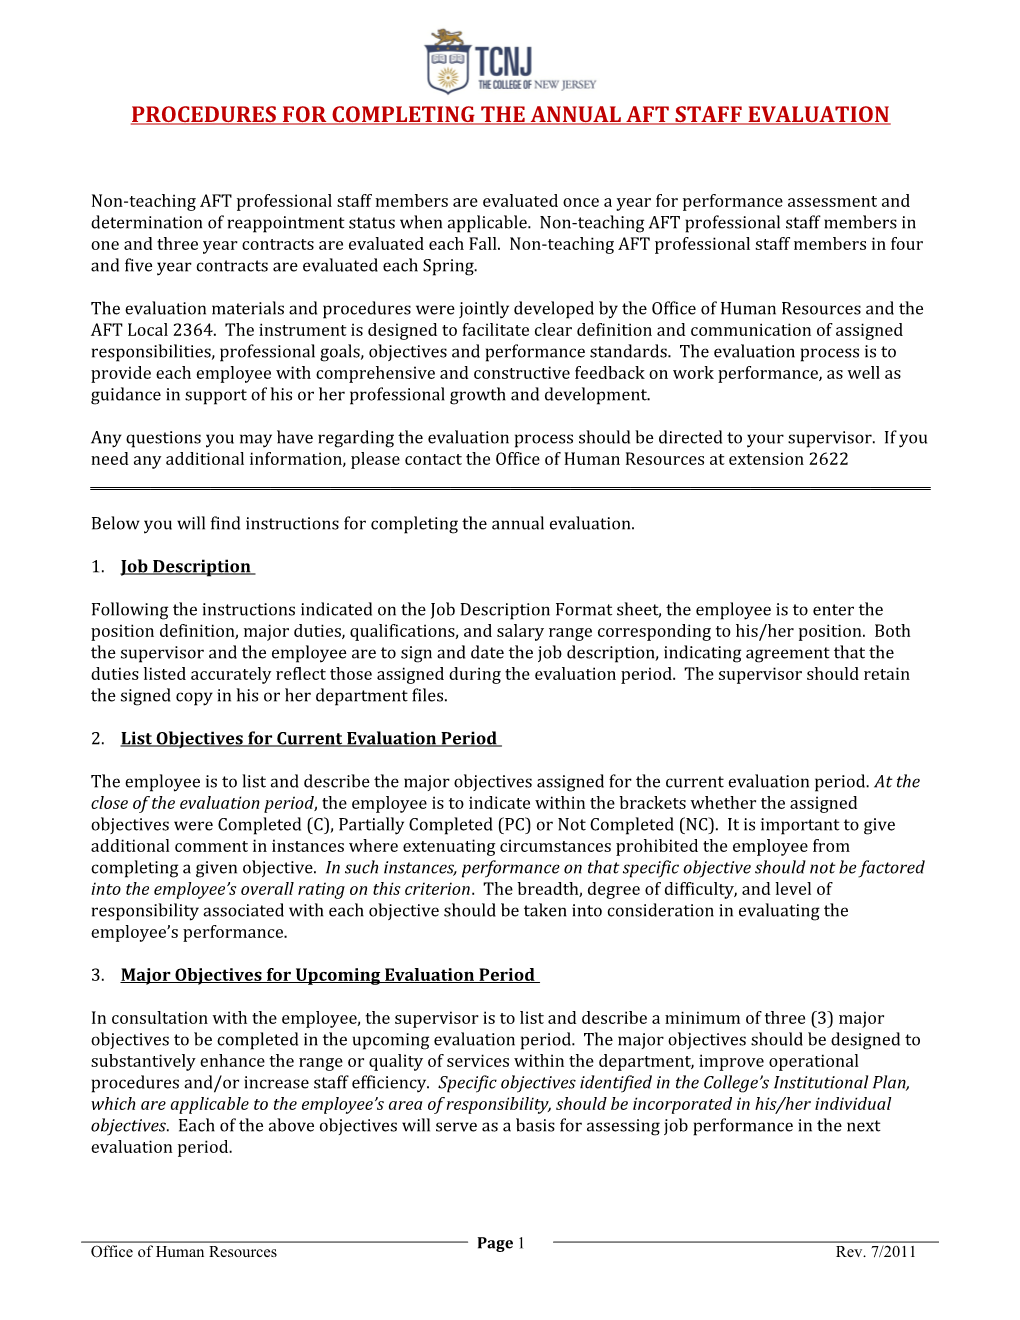 Procedures for Completing the Annual Aft Staff Evaluation